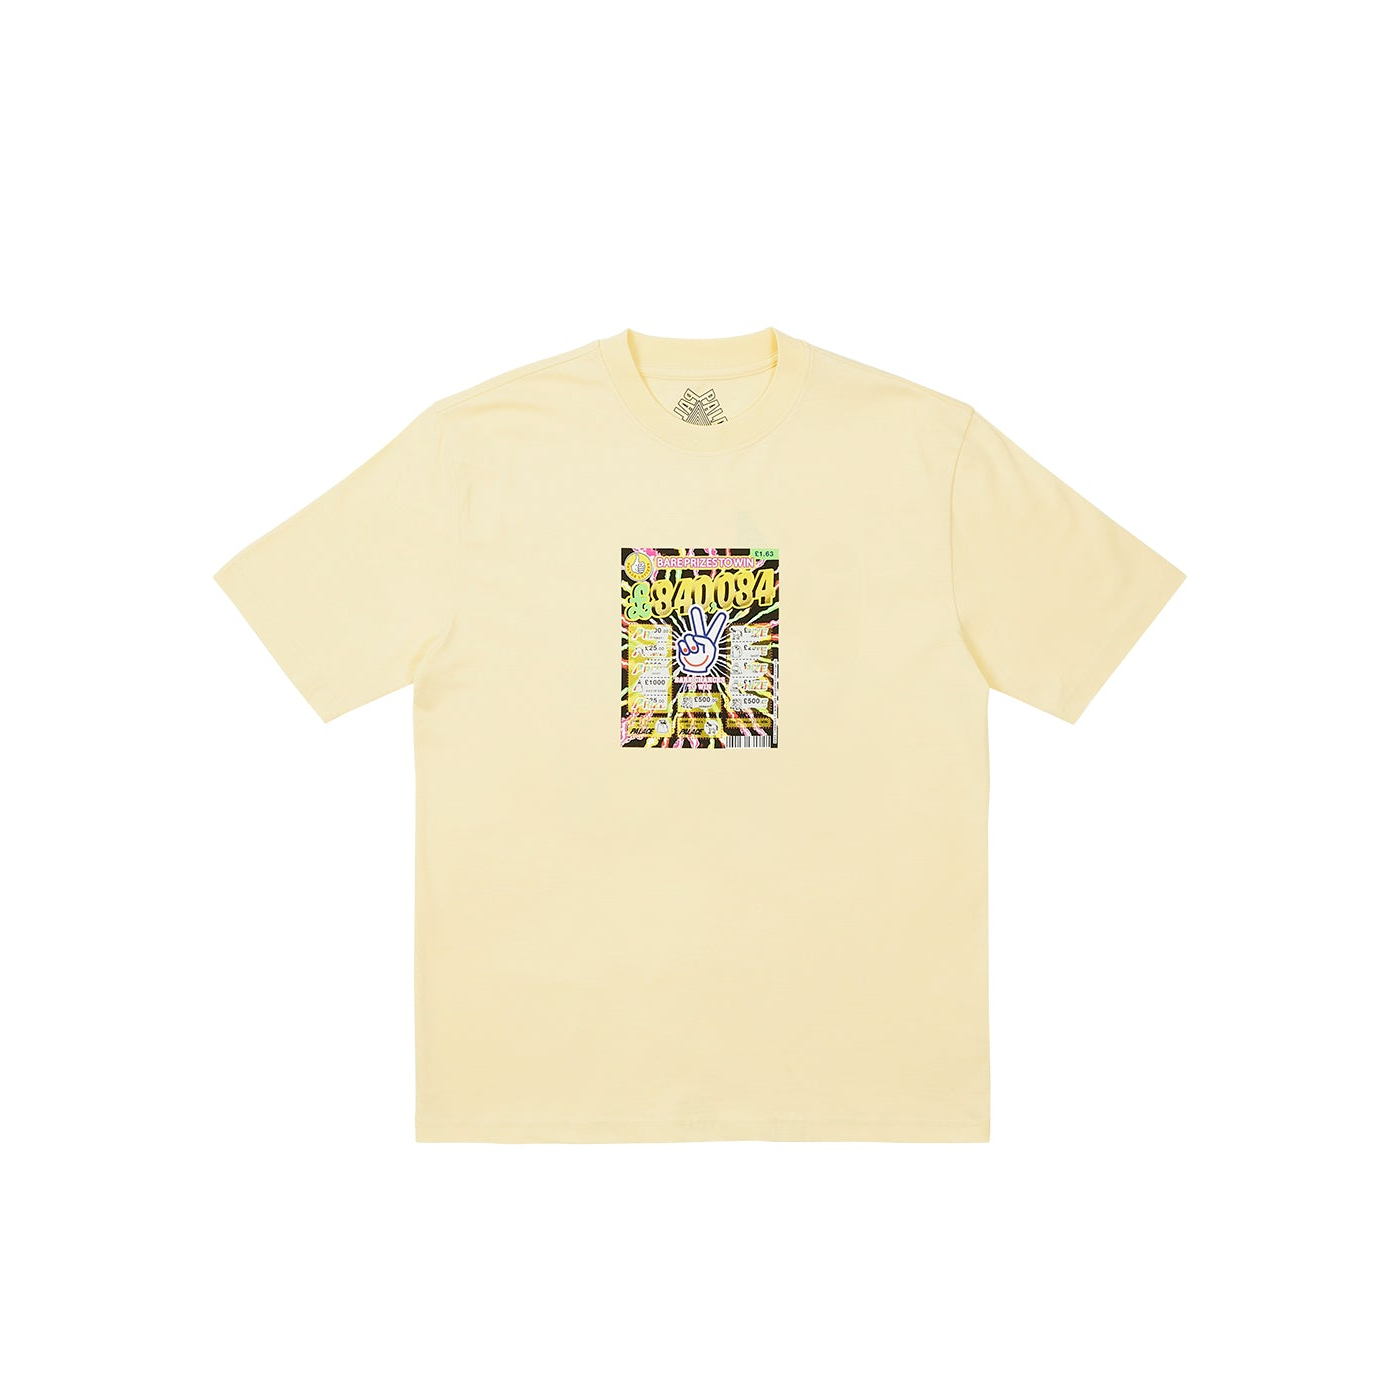 Thumbnail SCRATCHY T-SHIRT MELLOW YELLOW one color